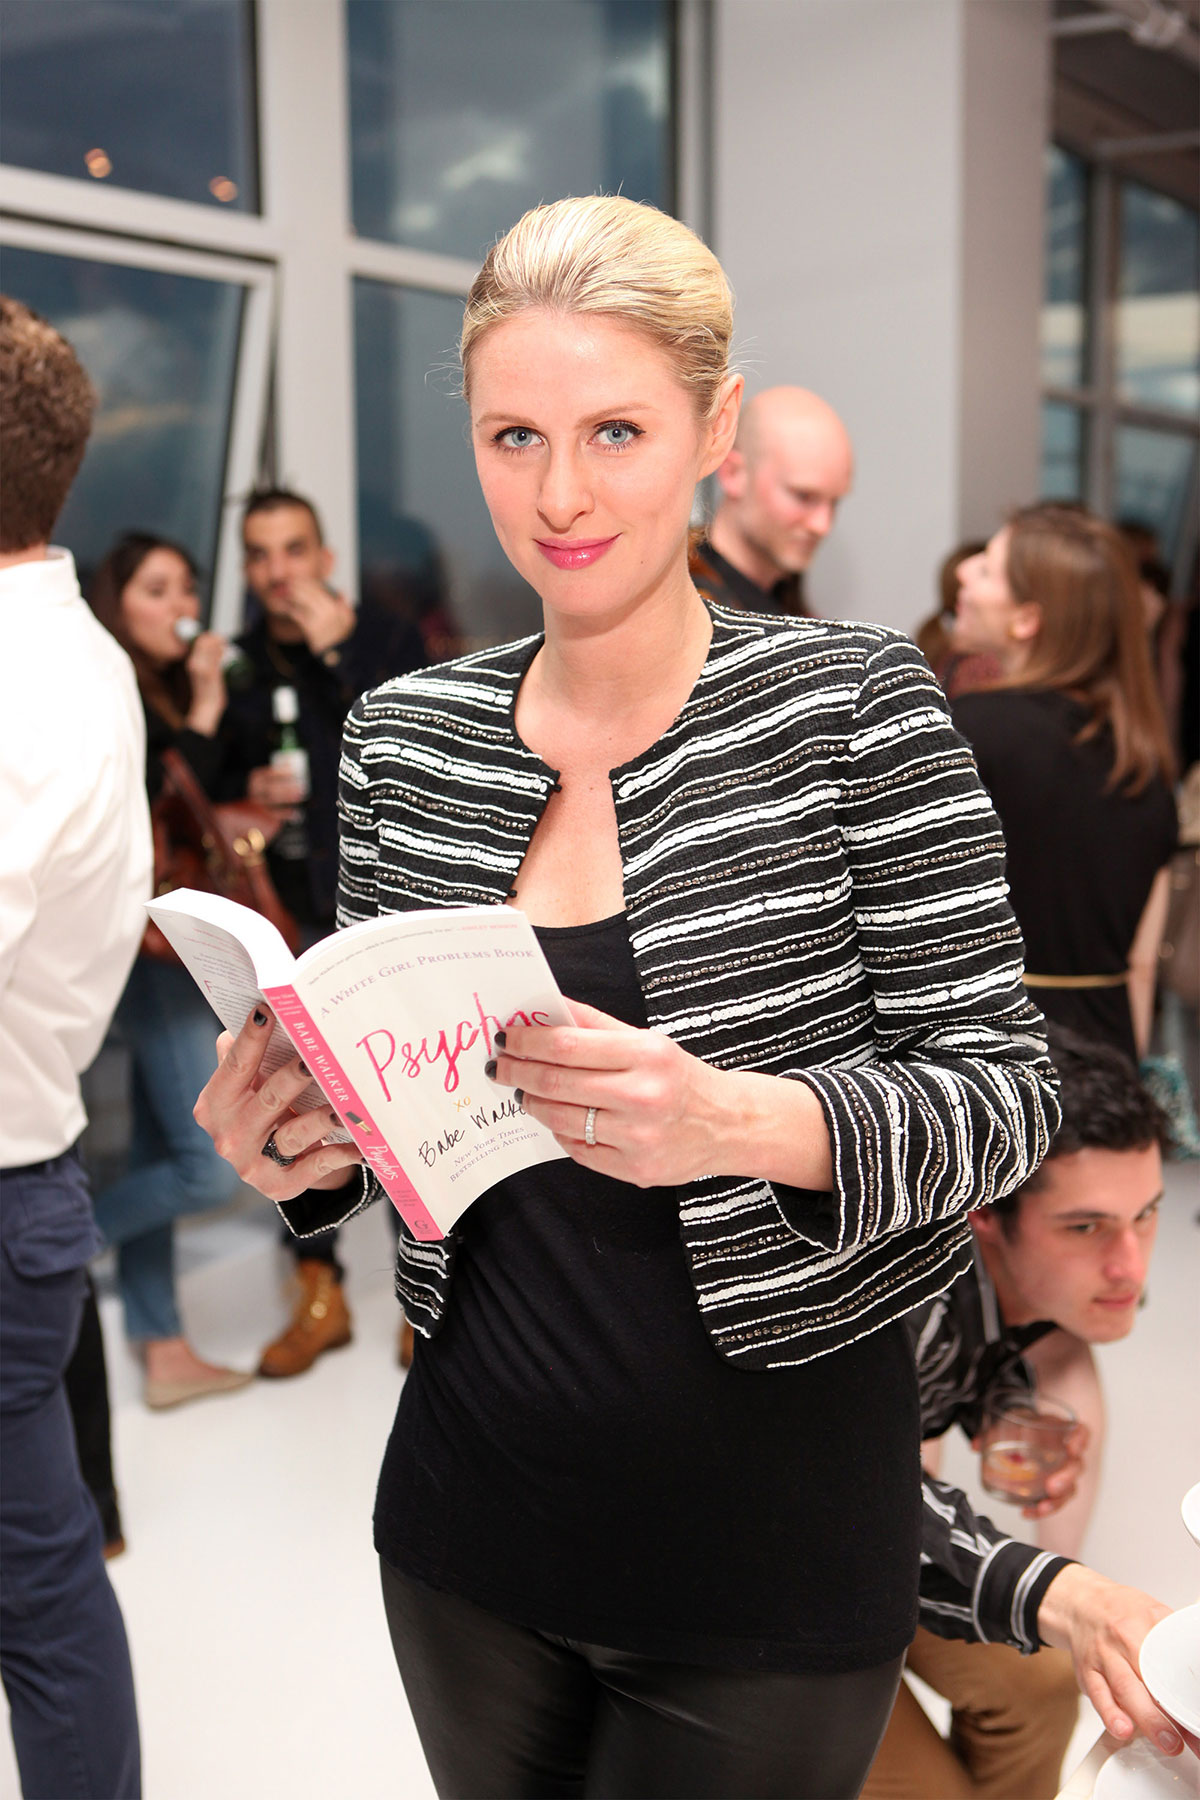 Nicky Hilton seen at the Psychos by Babe Walker Book Party